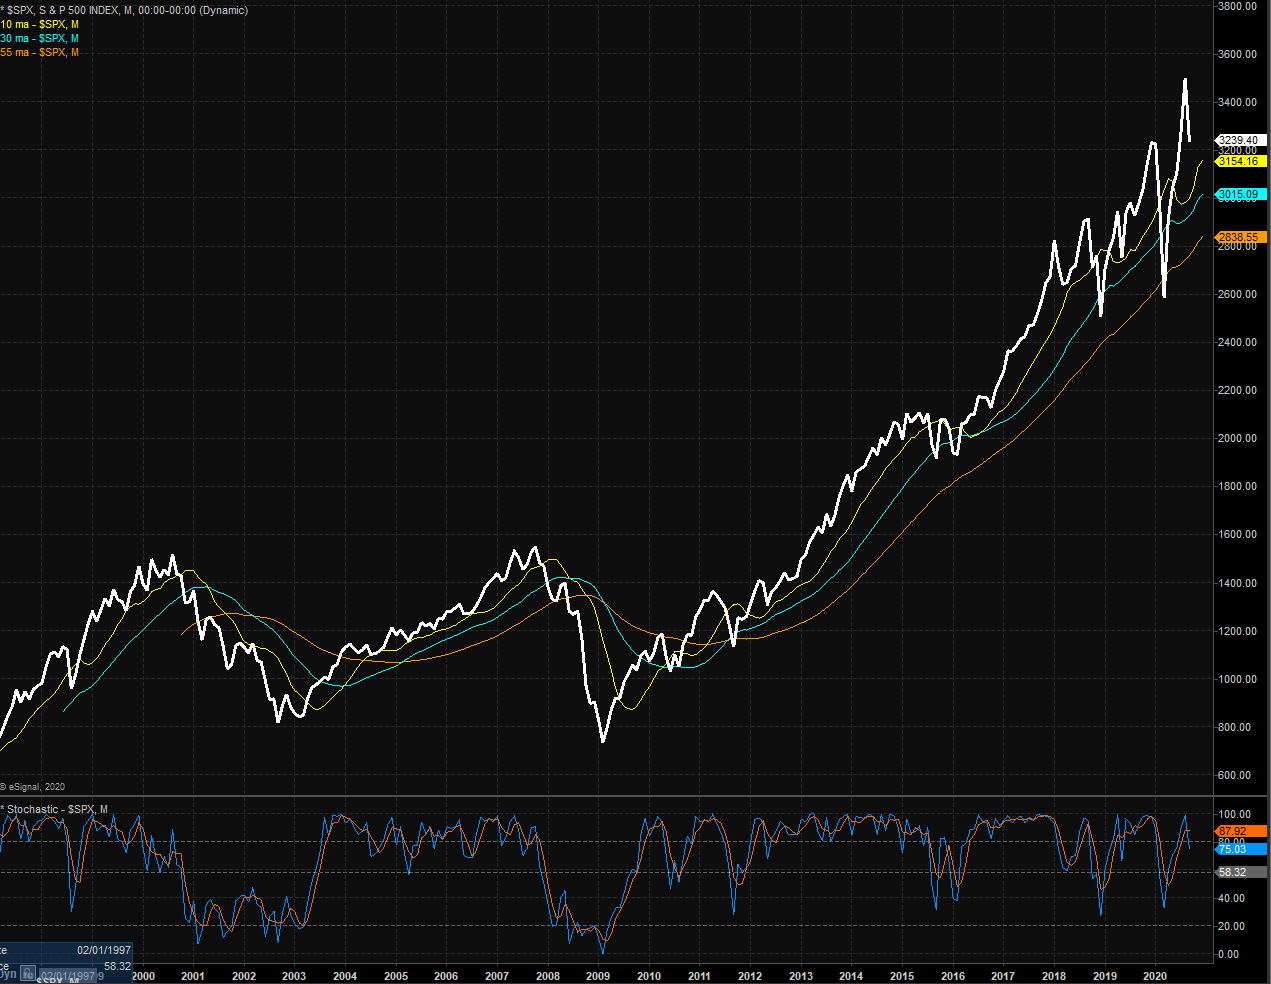 S&P 500 Monthly Chart.